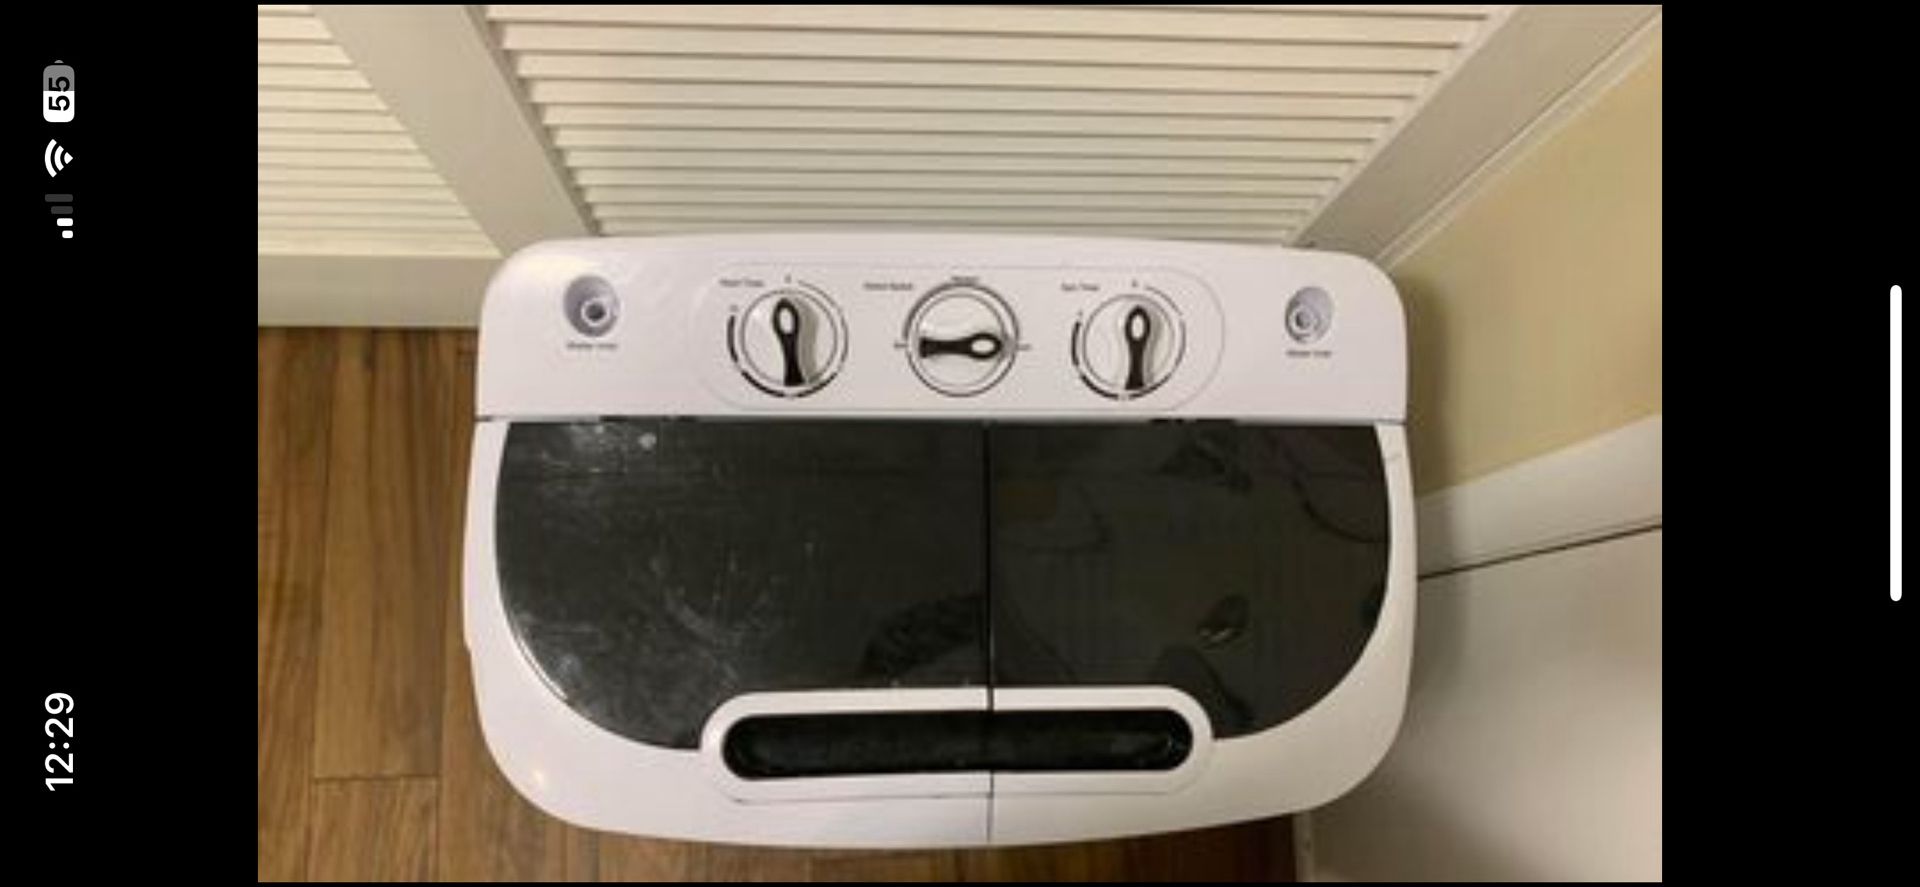 portable washer need gone asap